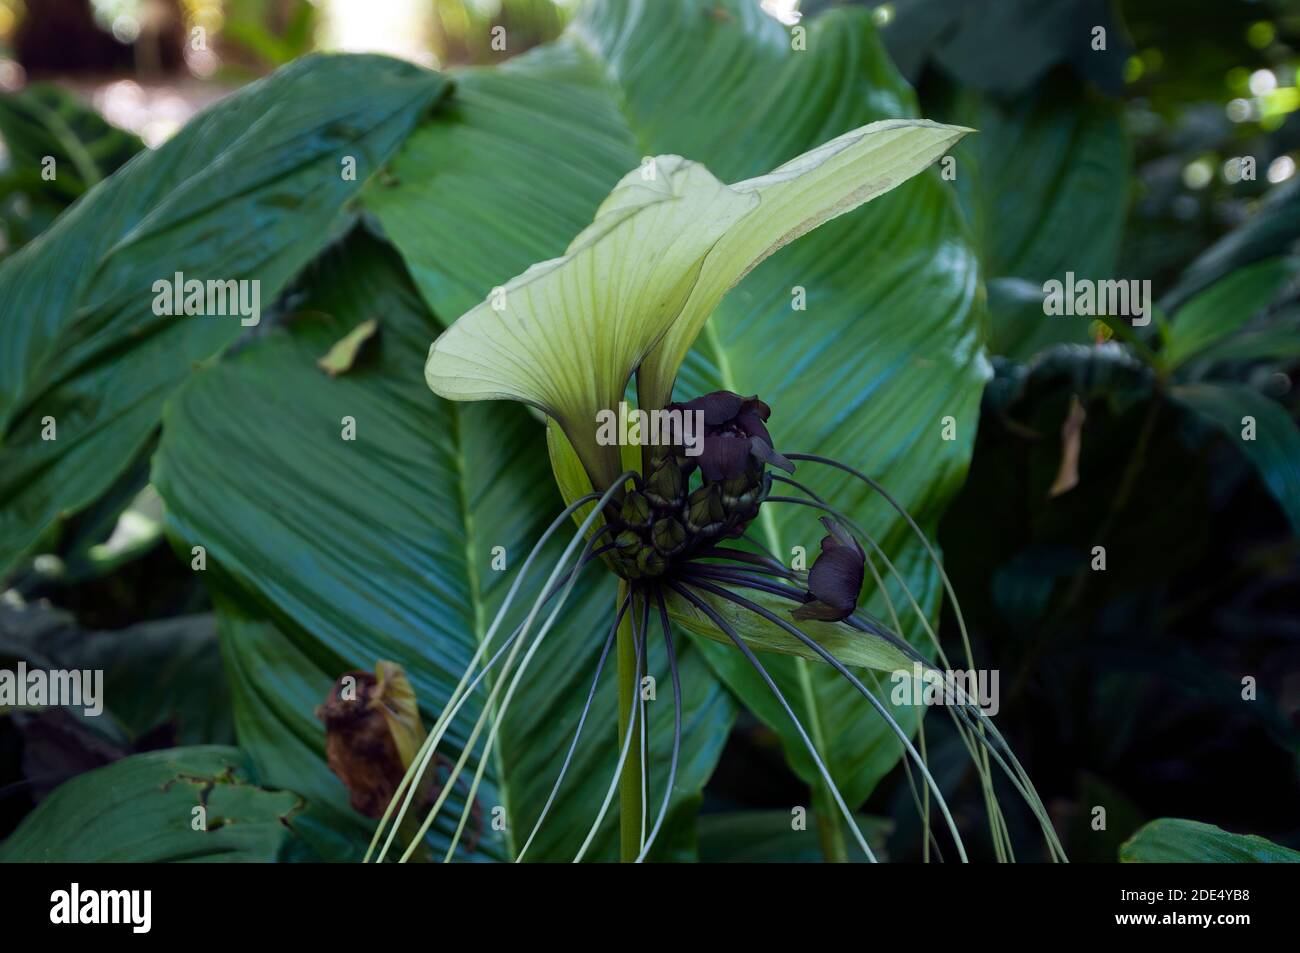 Sydney Australia, unusual flower of  a tacca integrifolia or white batflower, native to tropical and subtropical rainforests of Central Asia Stock Photo